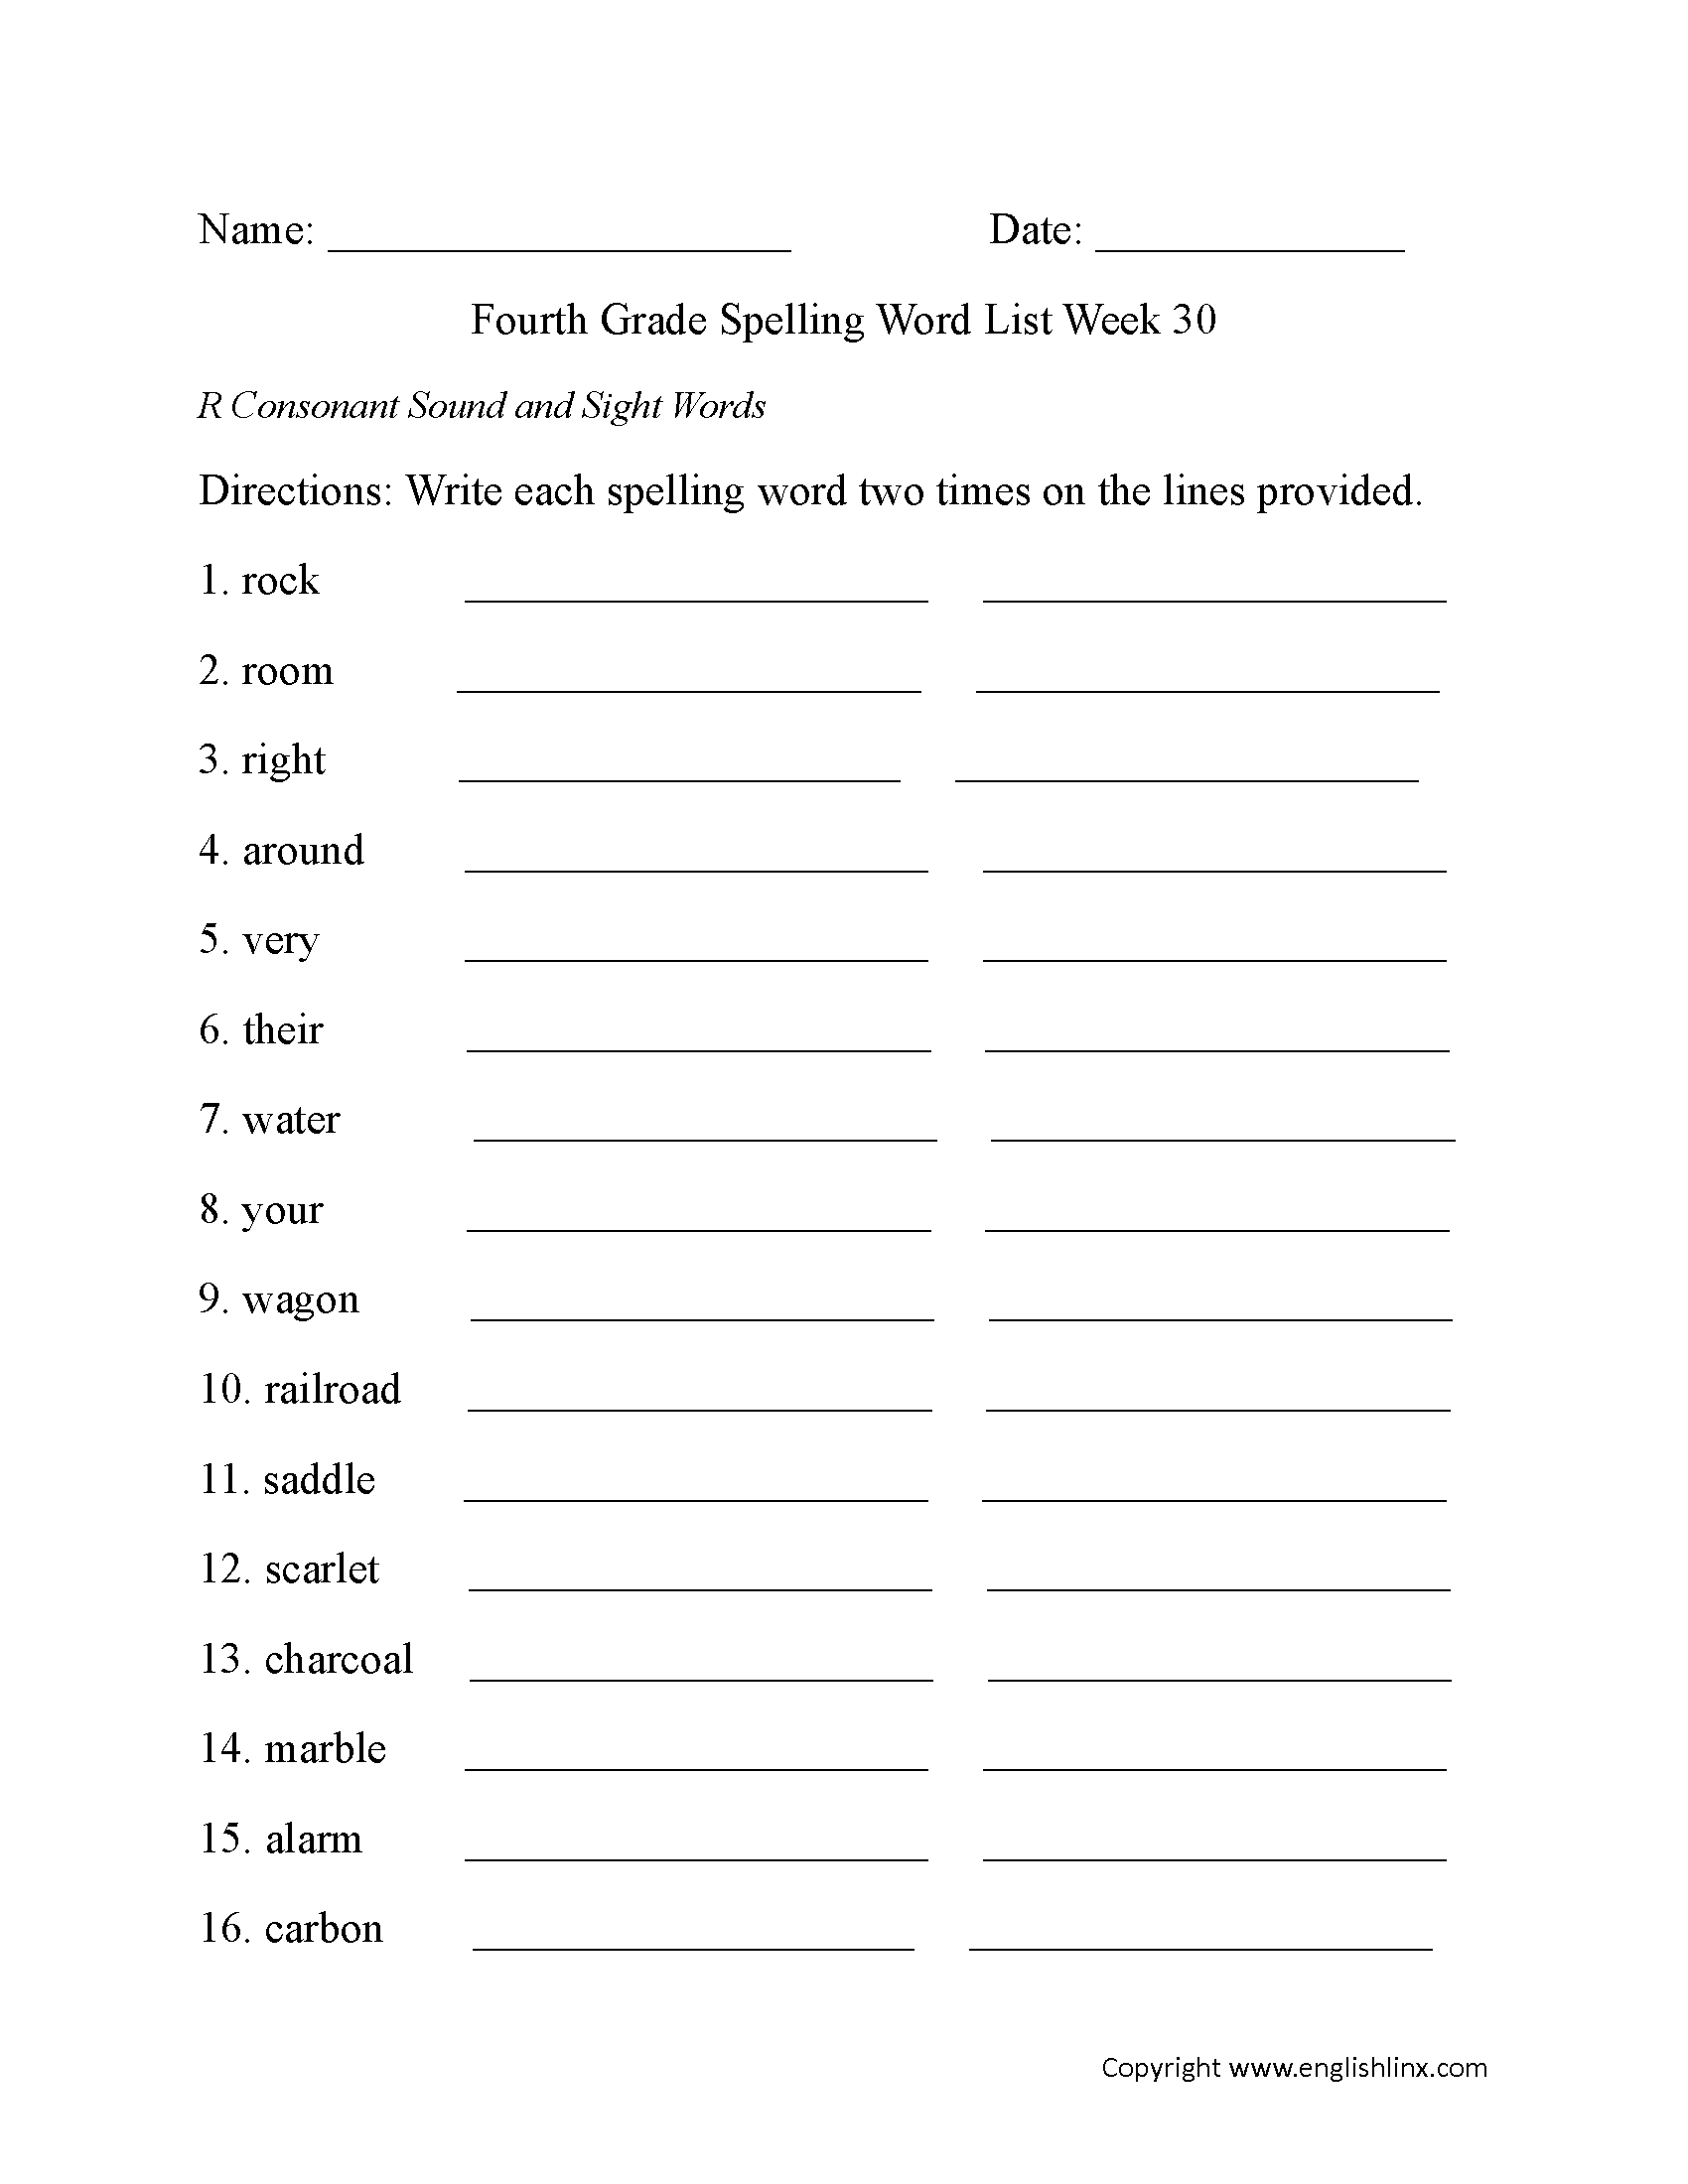 Week 30 R Consonant and Sight Words Fourth Grade Spelling Words Worksheets